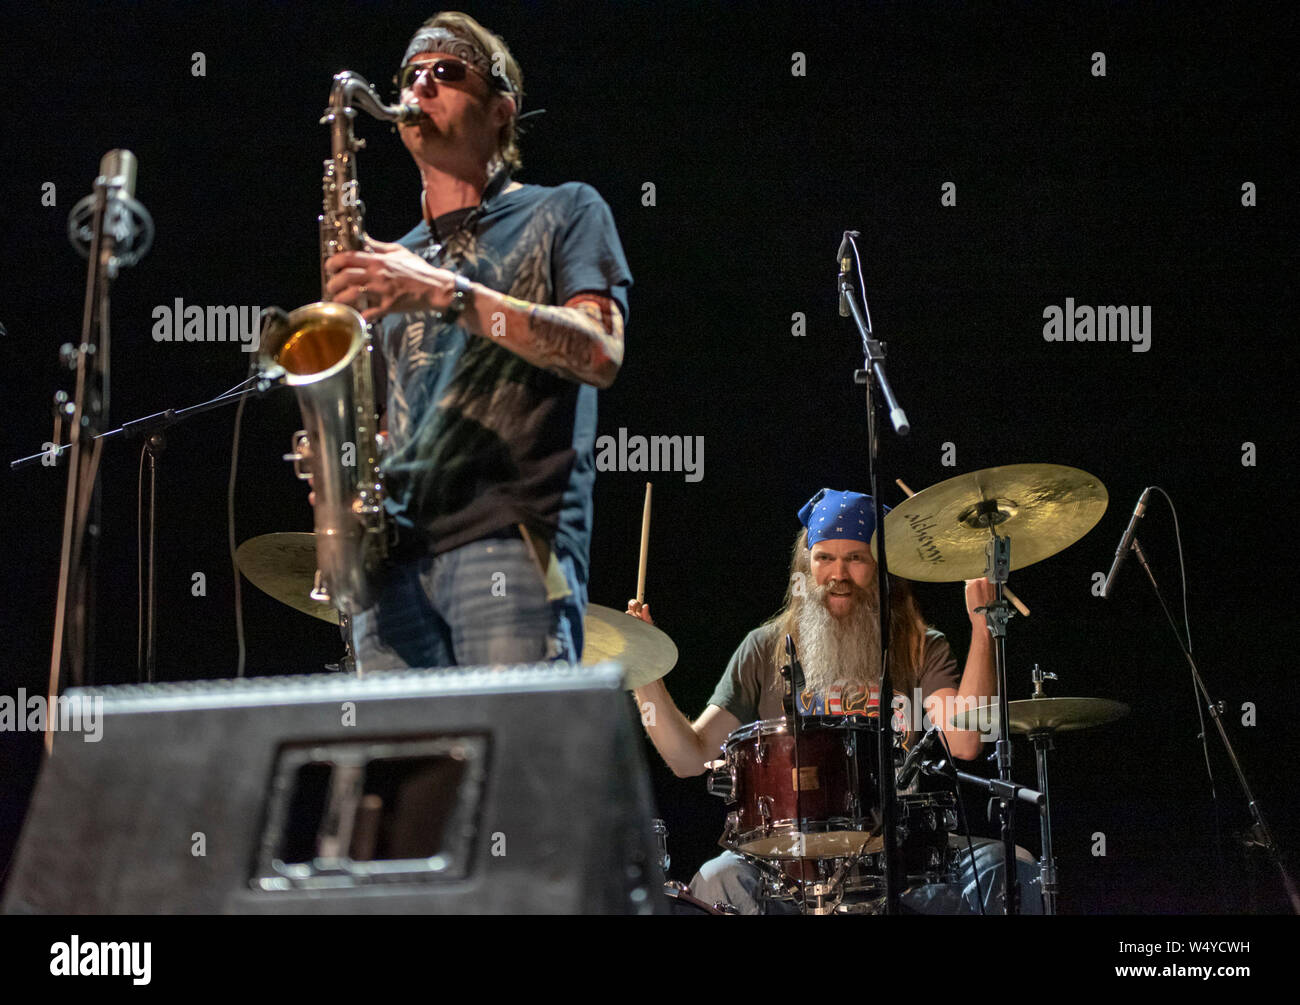 Zurriola beach, San Sebastian, Spain. 25th July, 2019.   Moppa Elliott (bass) and Dan Monaghan(drums),performing at Victoria Eugenia Theatre . Taking place 24-28 July in Donostia-San Sebastian the 54 edition of Heineken Jazzaldia 2019 (Basque Country-Spain).  The Festival is one of the oldest in Europe and the oldest in Spain. Credit: ALVARO VELAZQUEZ worldwidefeatures/Alamy Live News Bryan Murray (sax), Nick Millevoi (guitar), Ron Stabinsky (piano), Dan Monaghan (drums) performing at Victoria Eugenia Theatre . Credit: Gary Roberts/Alamy Live News Stock Photo